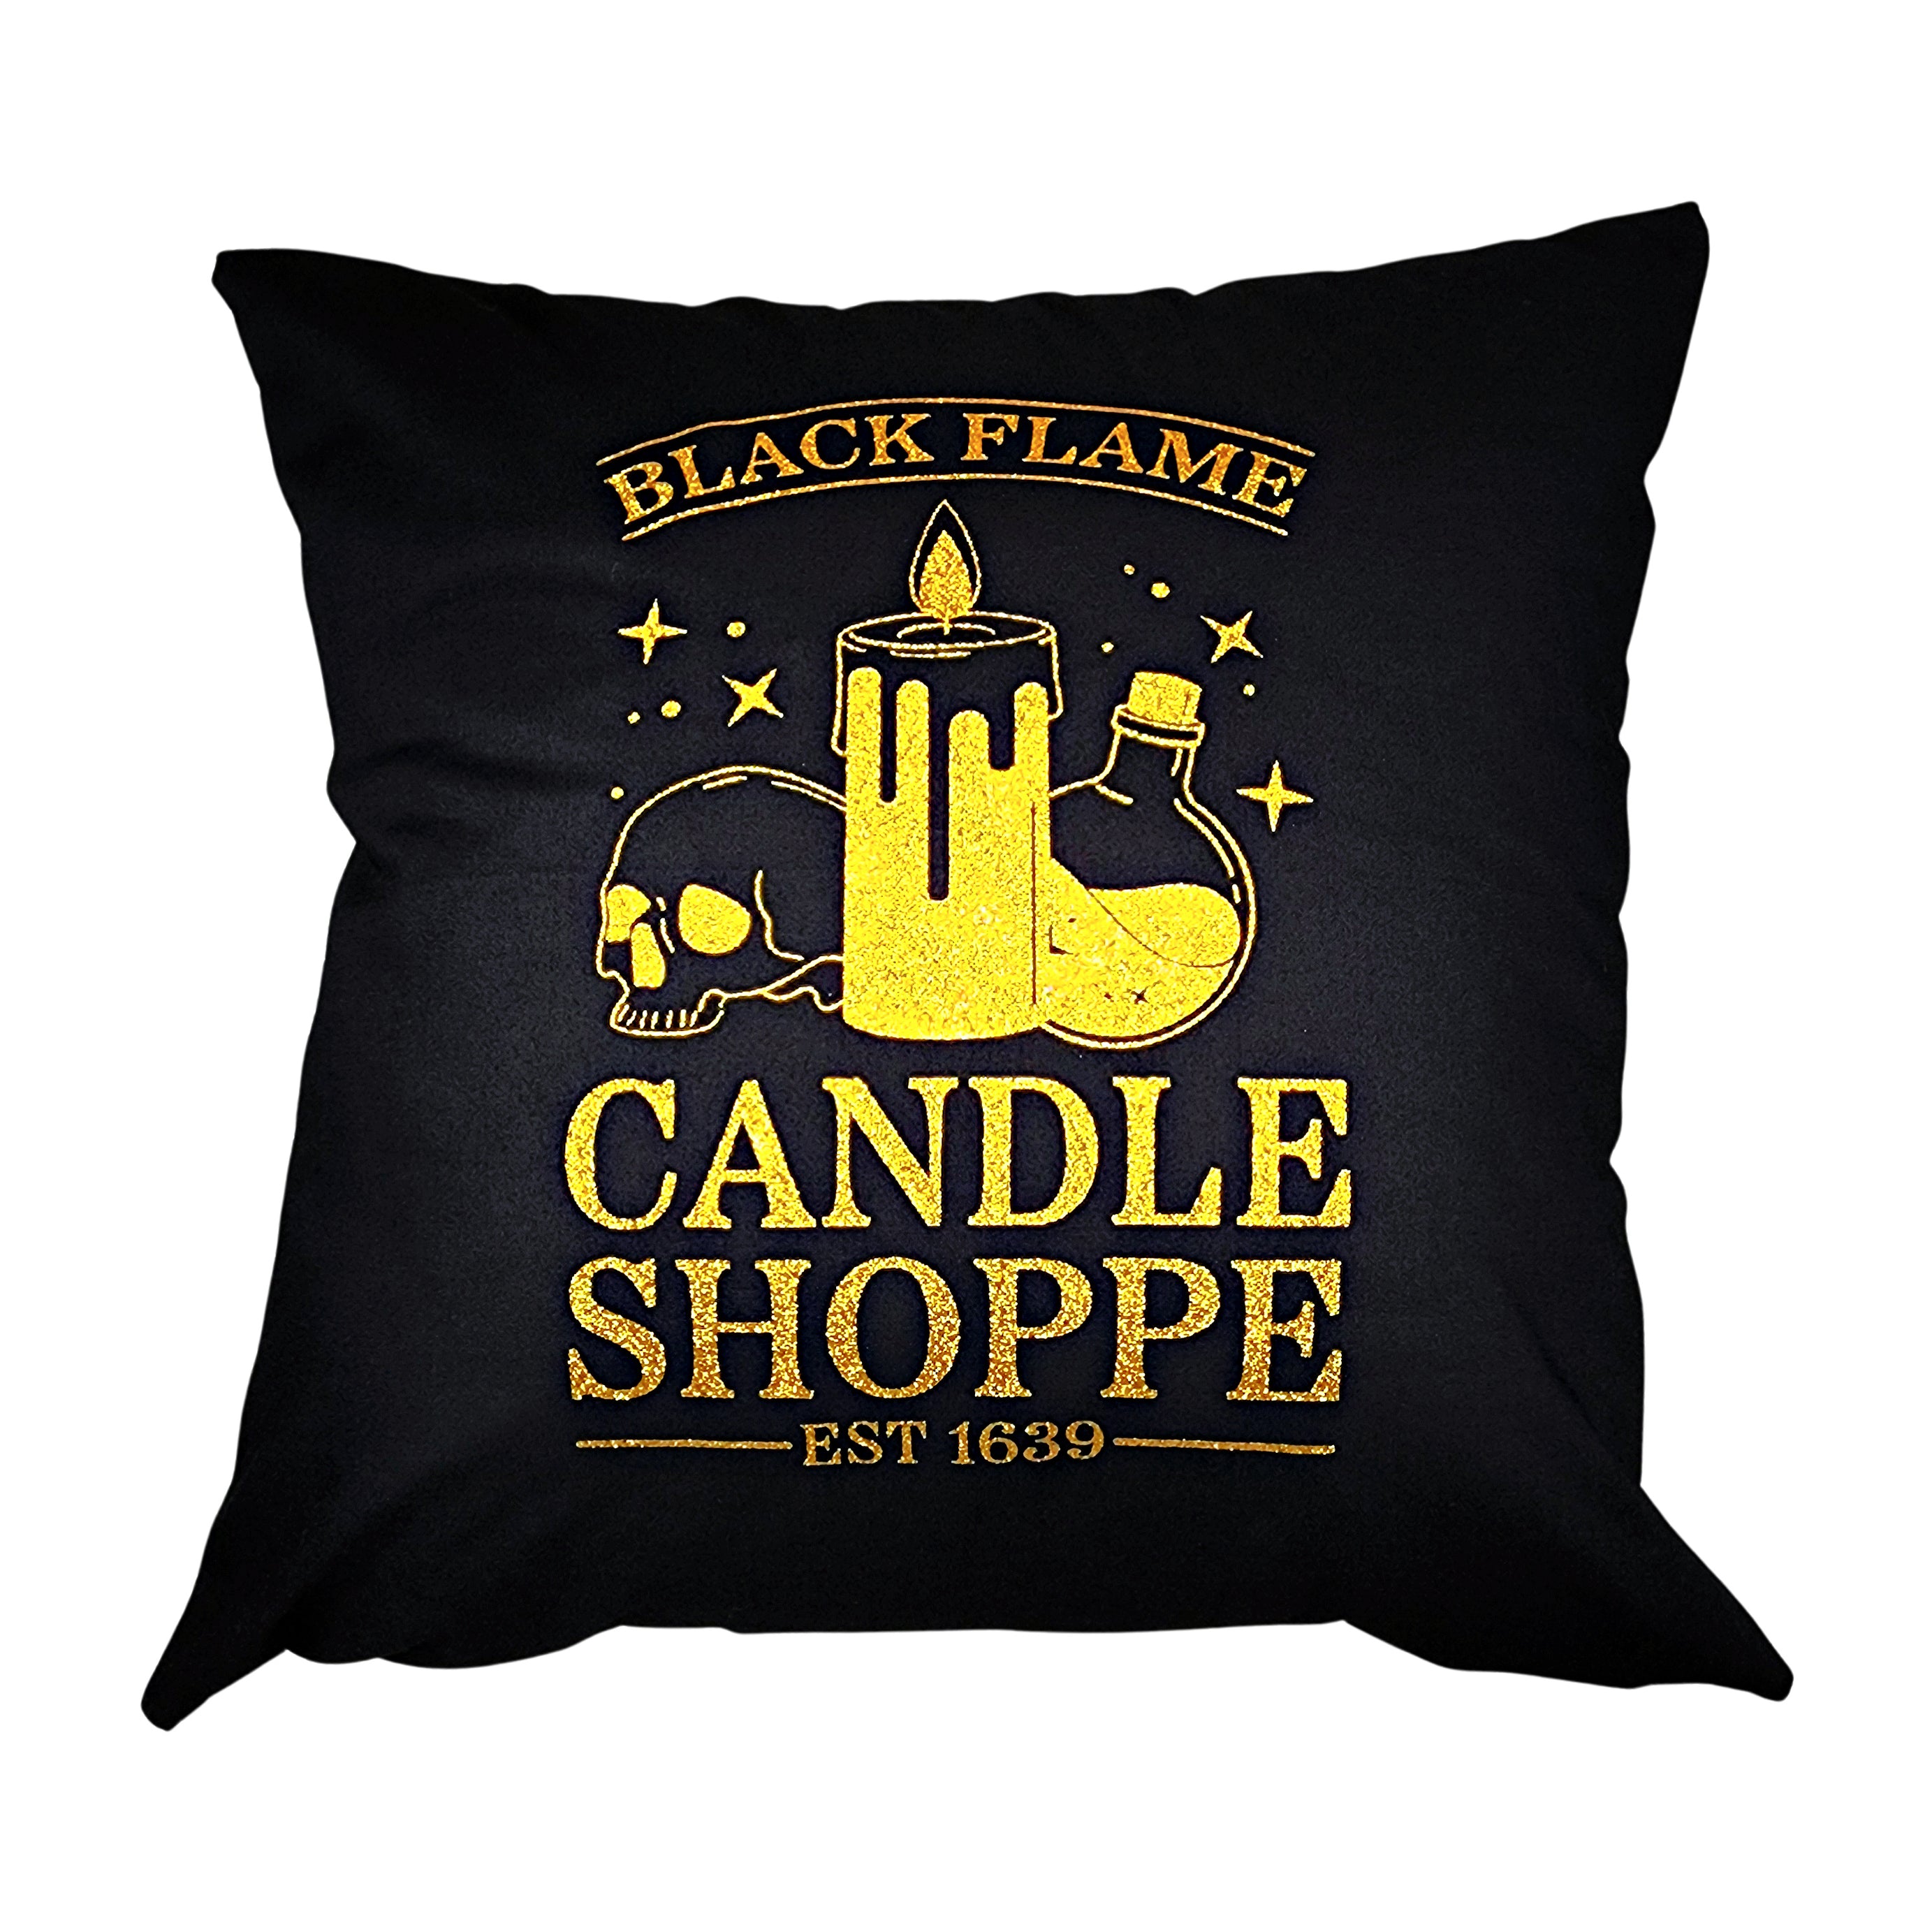 Black Flame Candle Shoppe Halloween Throw Pillow Cover, Your Choice of Glitter Color